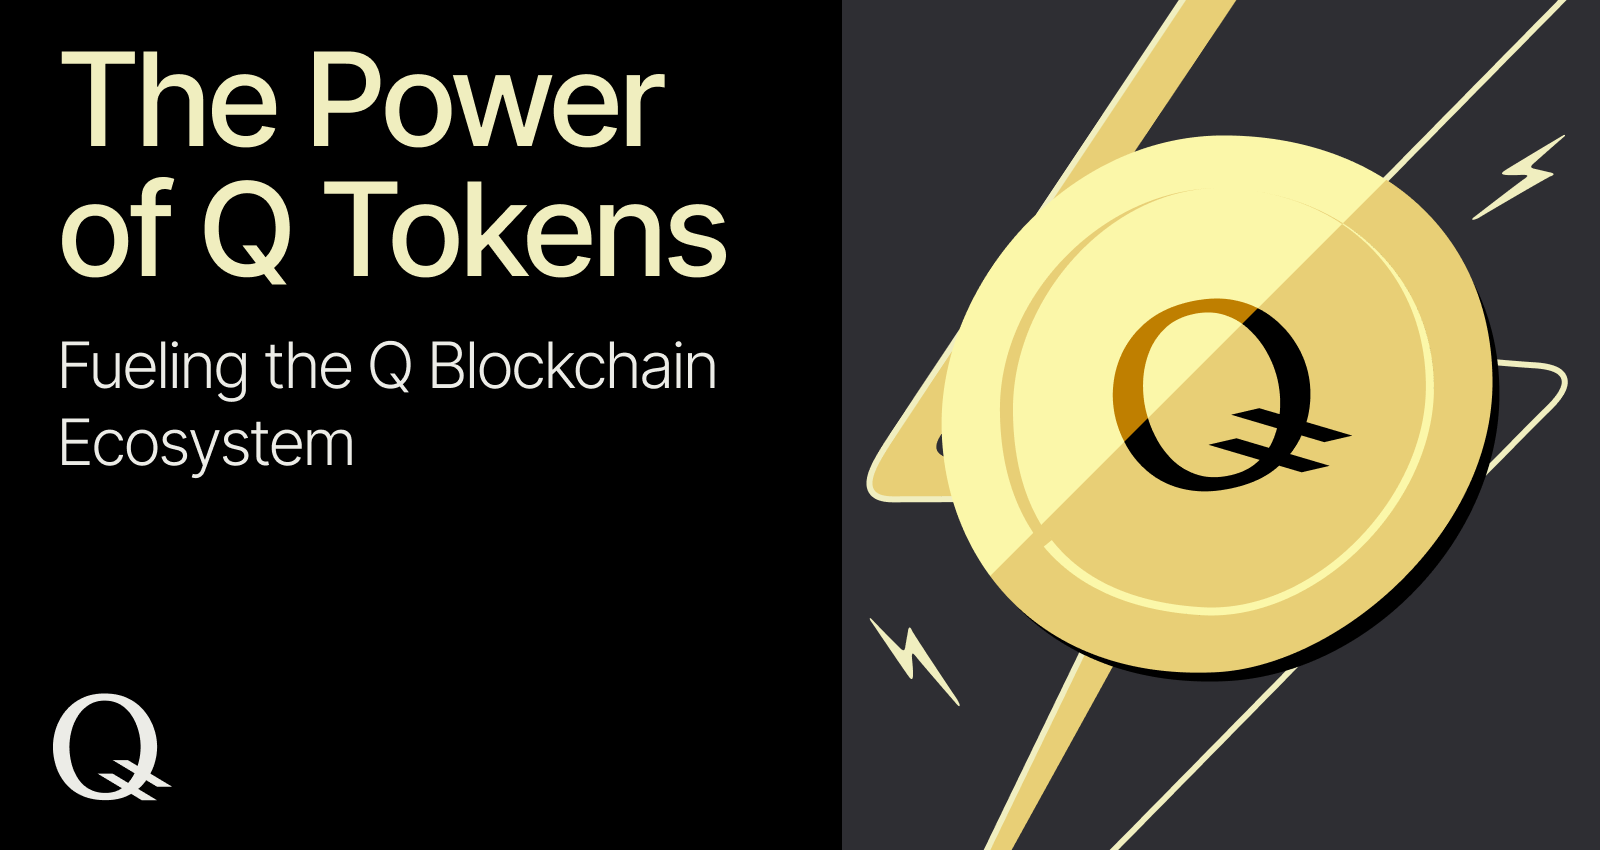 The Power of QGOV Tokens: Fueling the Q Blockchain Ecosystem